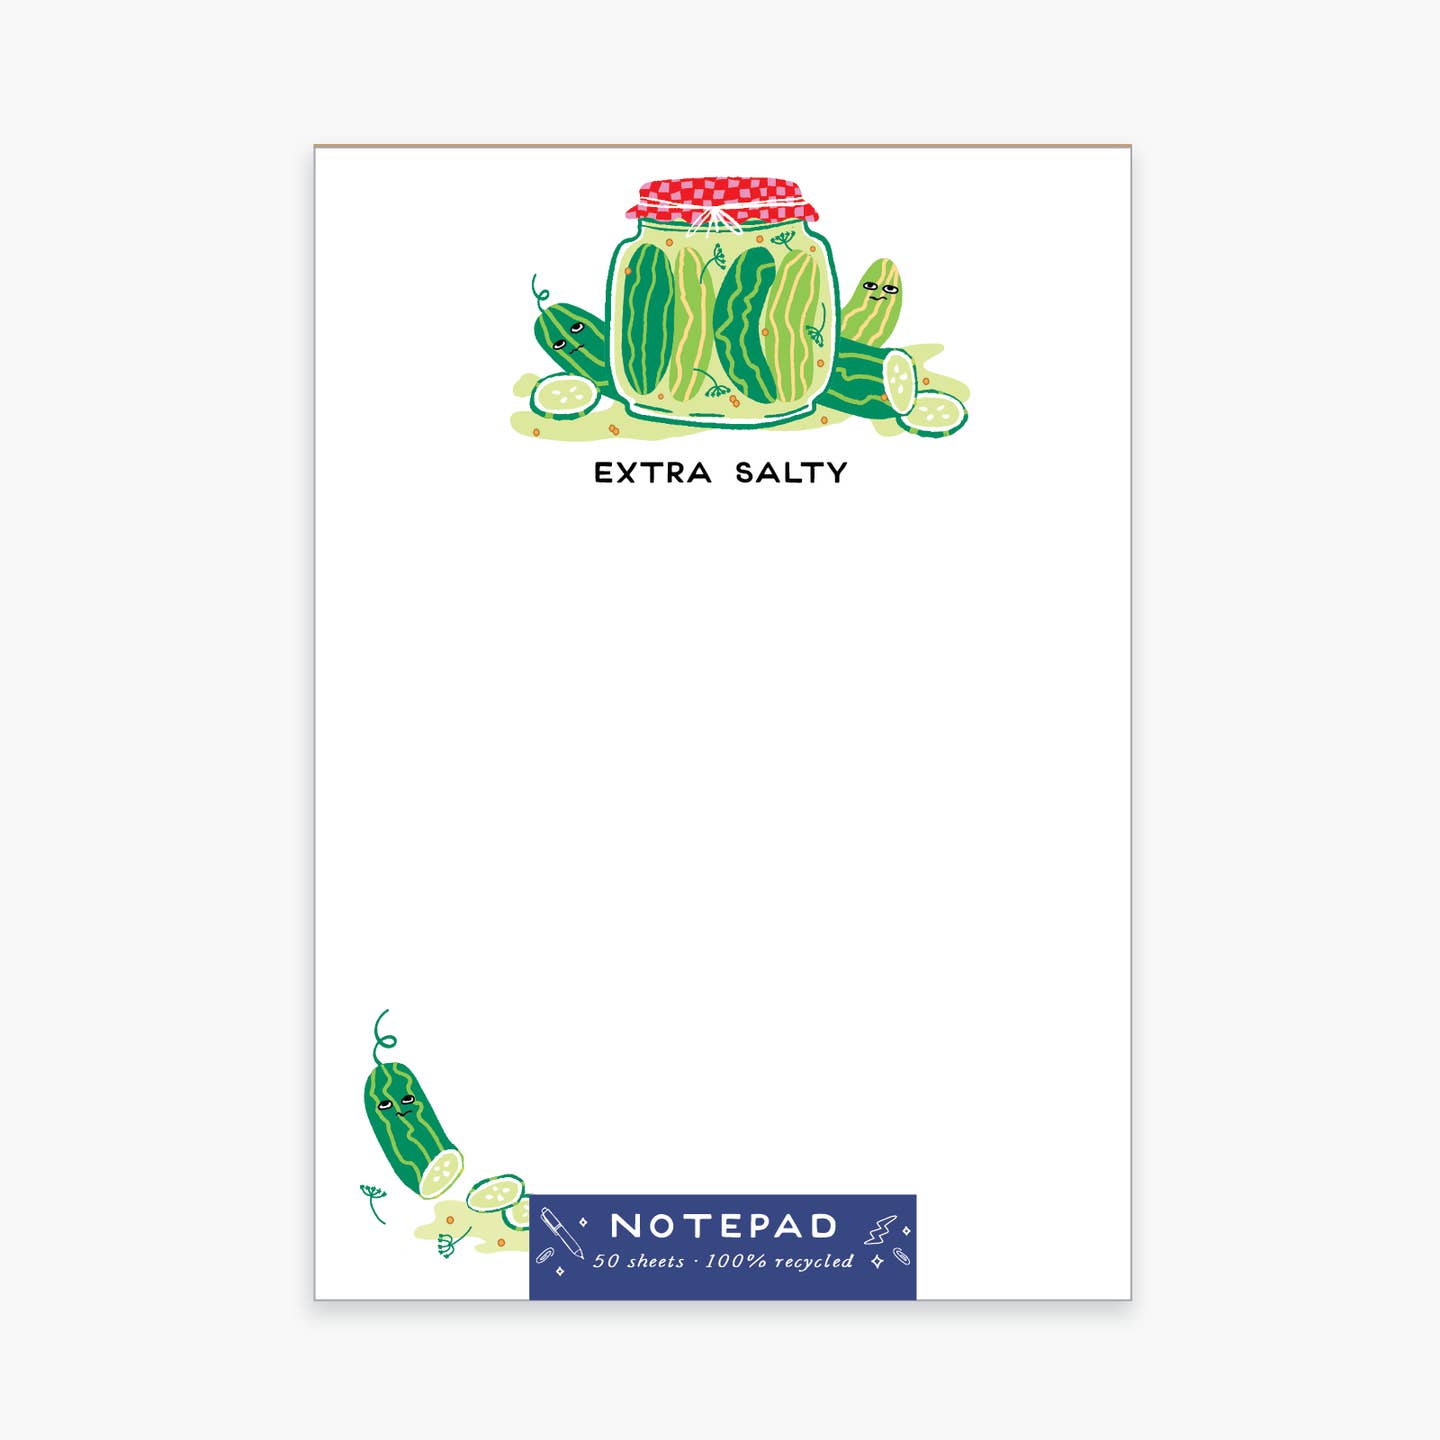 Notepad with white background with image of a jar of pickles at the top and black text says, "Extra salty". Image of pickle sliced at bottom left corner. 